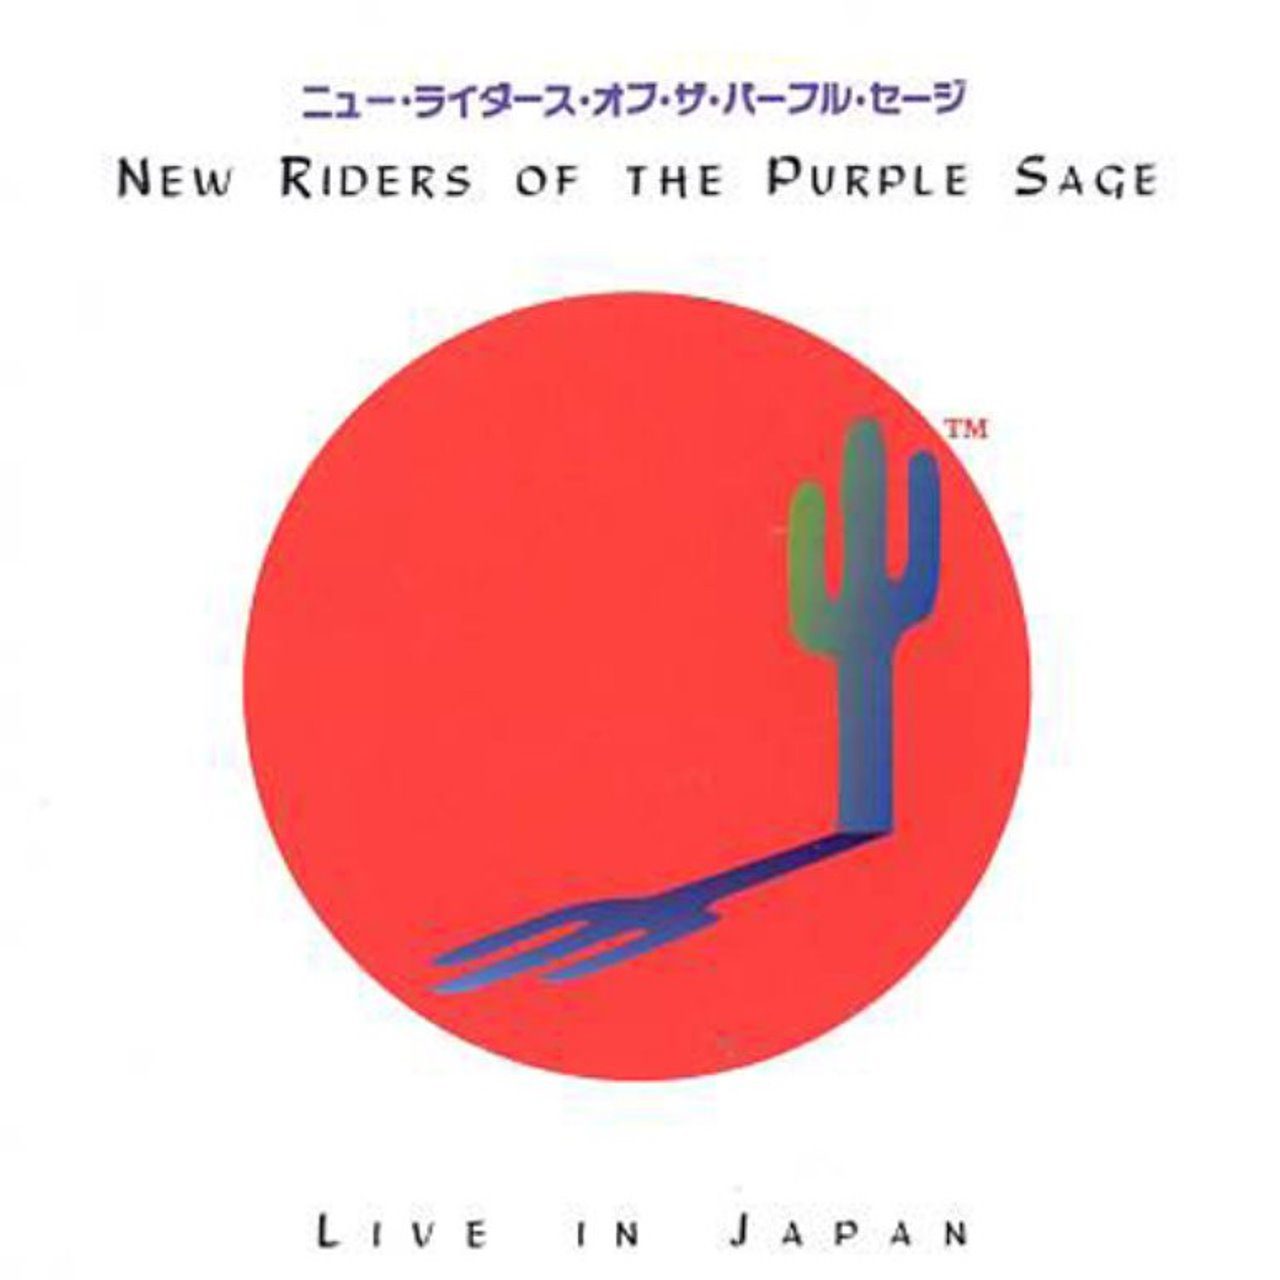 New Riders Of The Purple Sage – Live In Japan cover album